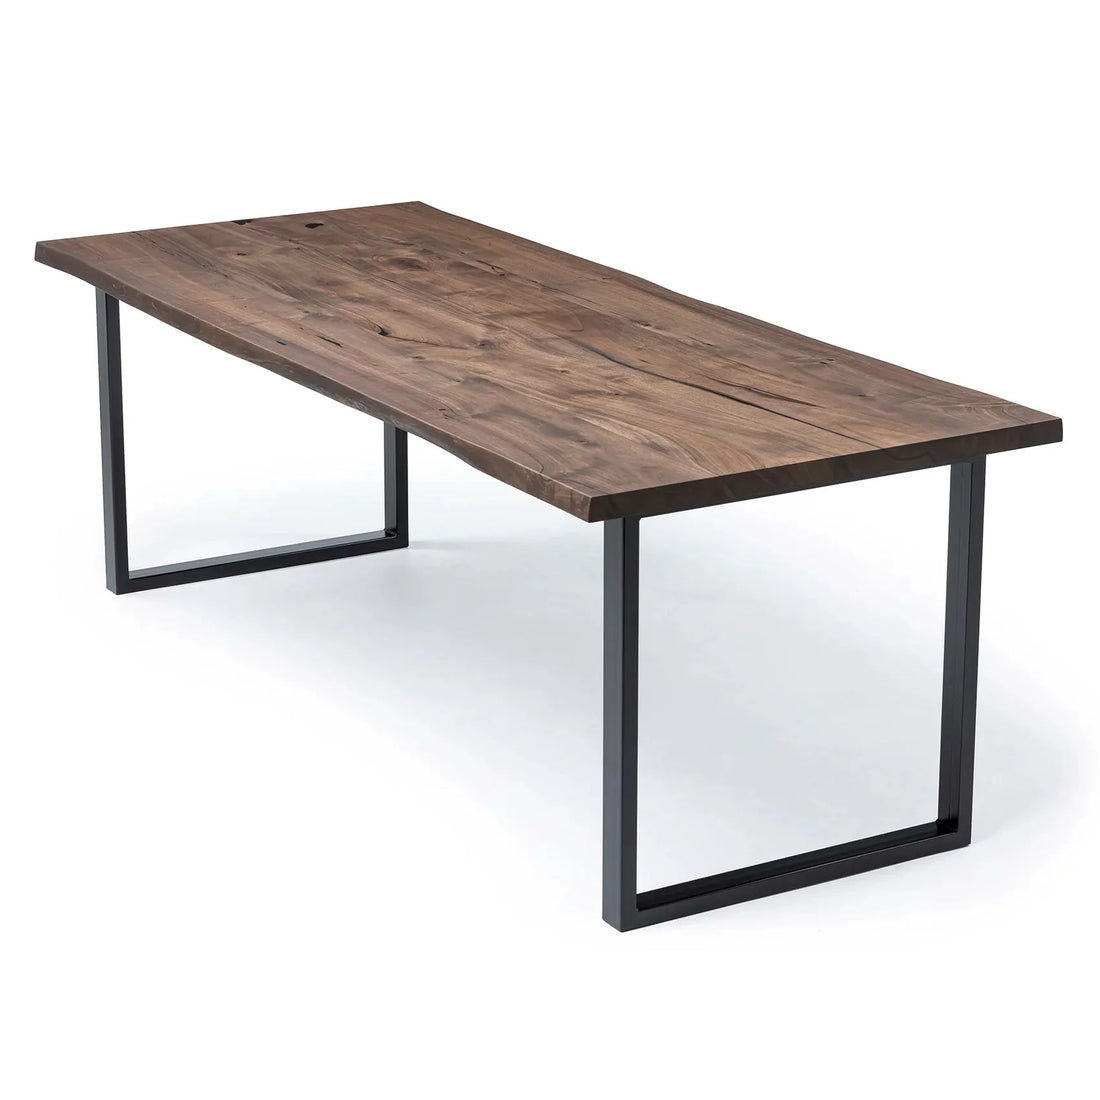 Office Chocolate Walnut Table - 120 X 80cm / 4 Seater 140 x 80cm / 5 Seater 160 x 80cm / 6 Seater 180 x 90cm / 7 Seater 200 x 90cm / 8 Seater 240 X 95cm / 10 Seater 300 X 100cm / 12 Seater CUSTOM SIZE - Kindly complete the form below by S10Home